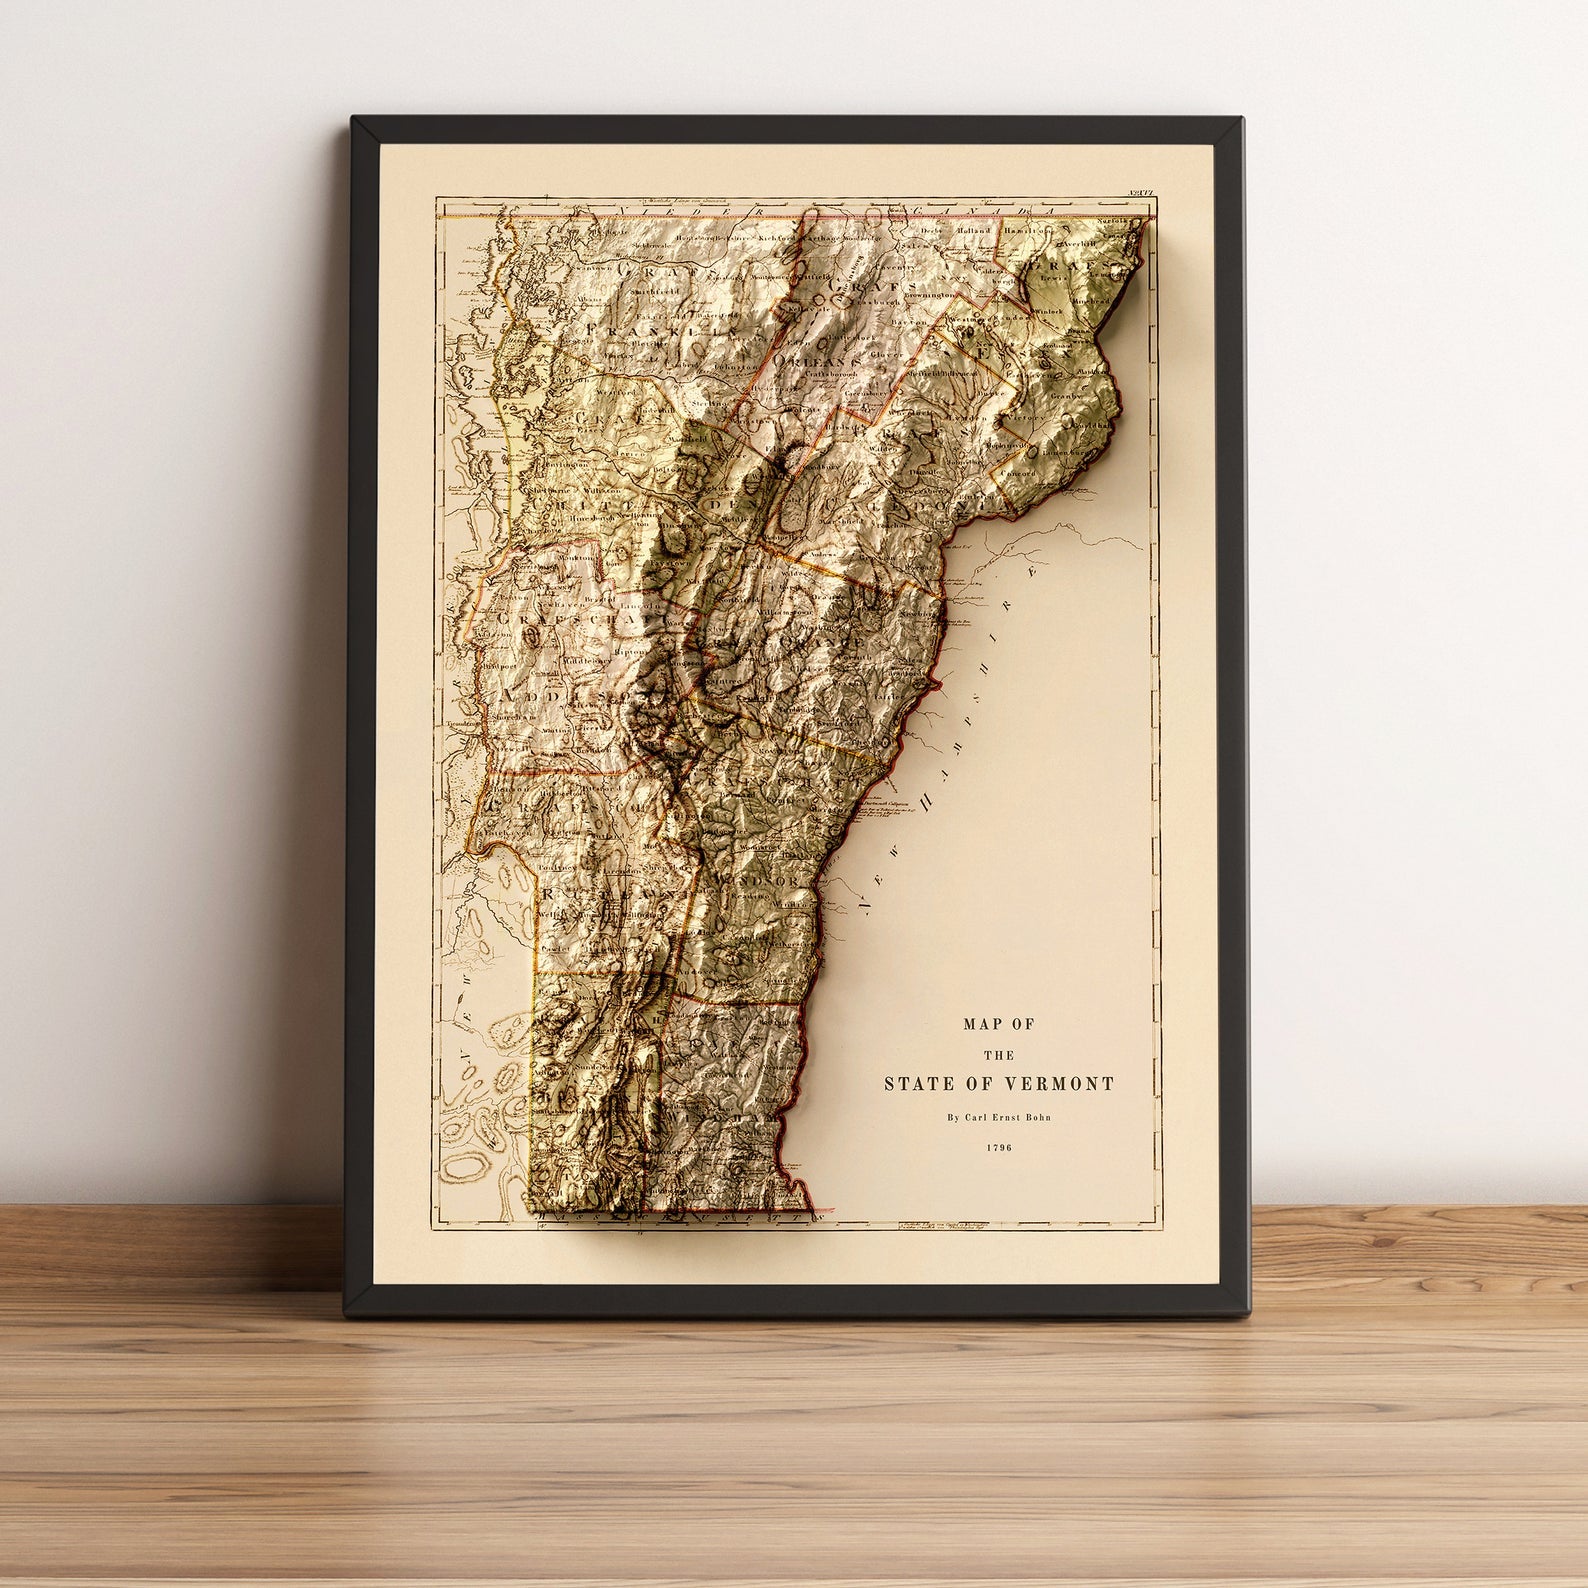 Image showing a vintage relief map of Vermont